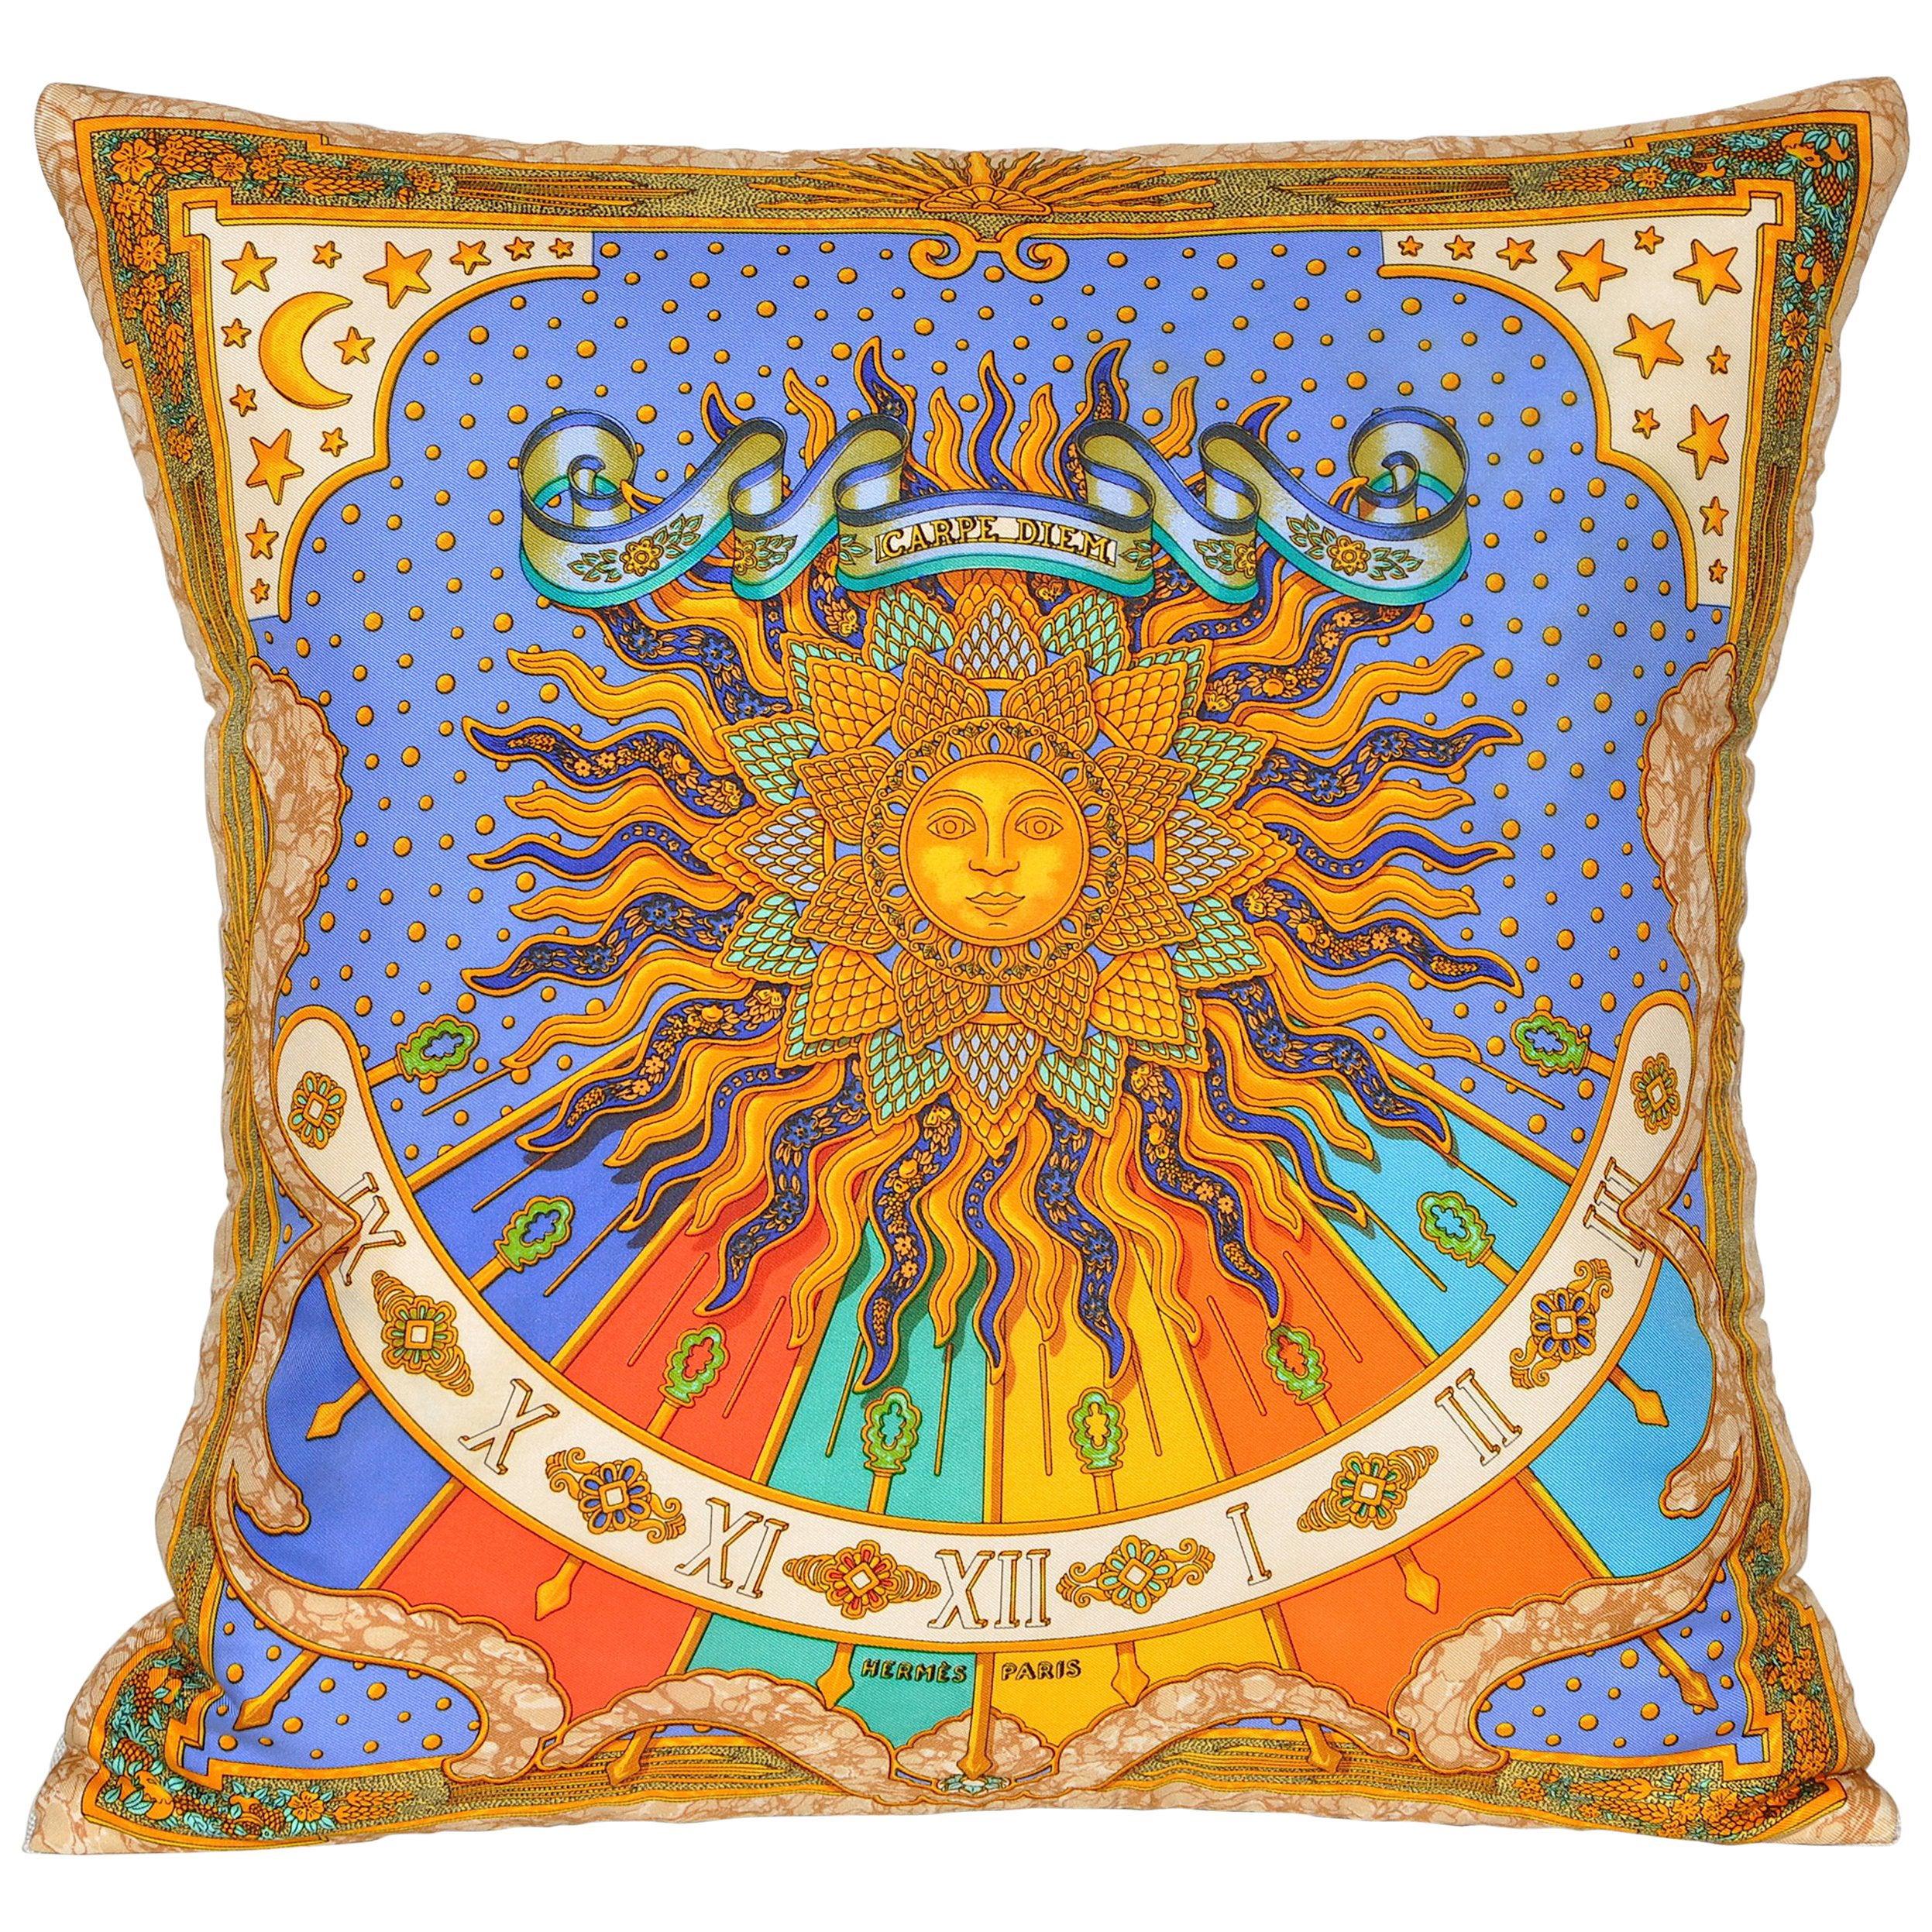 Vintage Hermes Bright Blue and Gold Silk Fabric and Irish Linen Pillows

Please note: Each piece is sold as a separate item, it you would like both please enter x2 for quantity. 

This pair of cushions is a one of a kind set and part of a